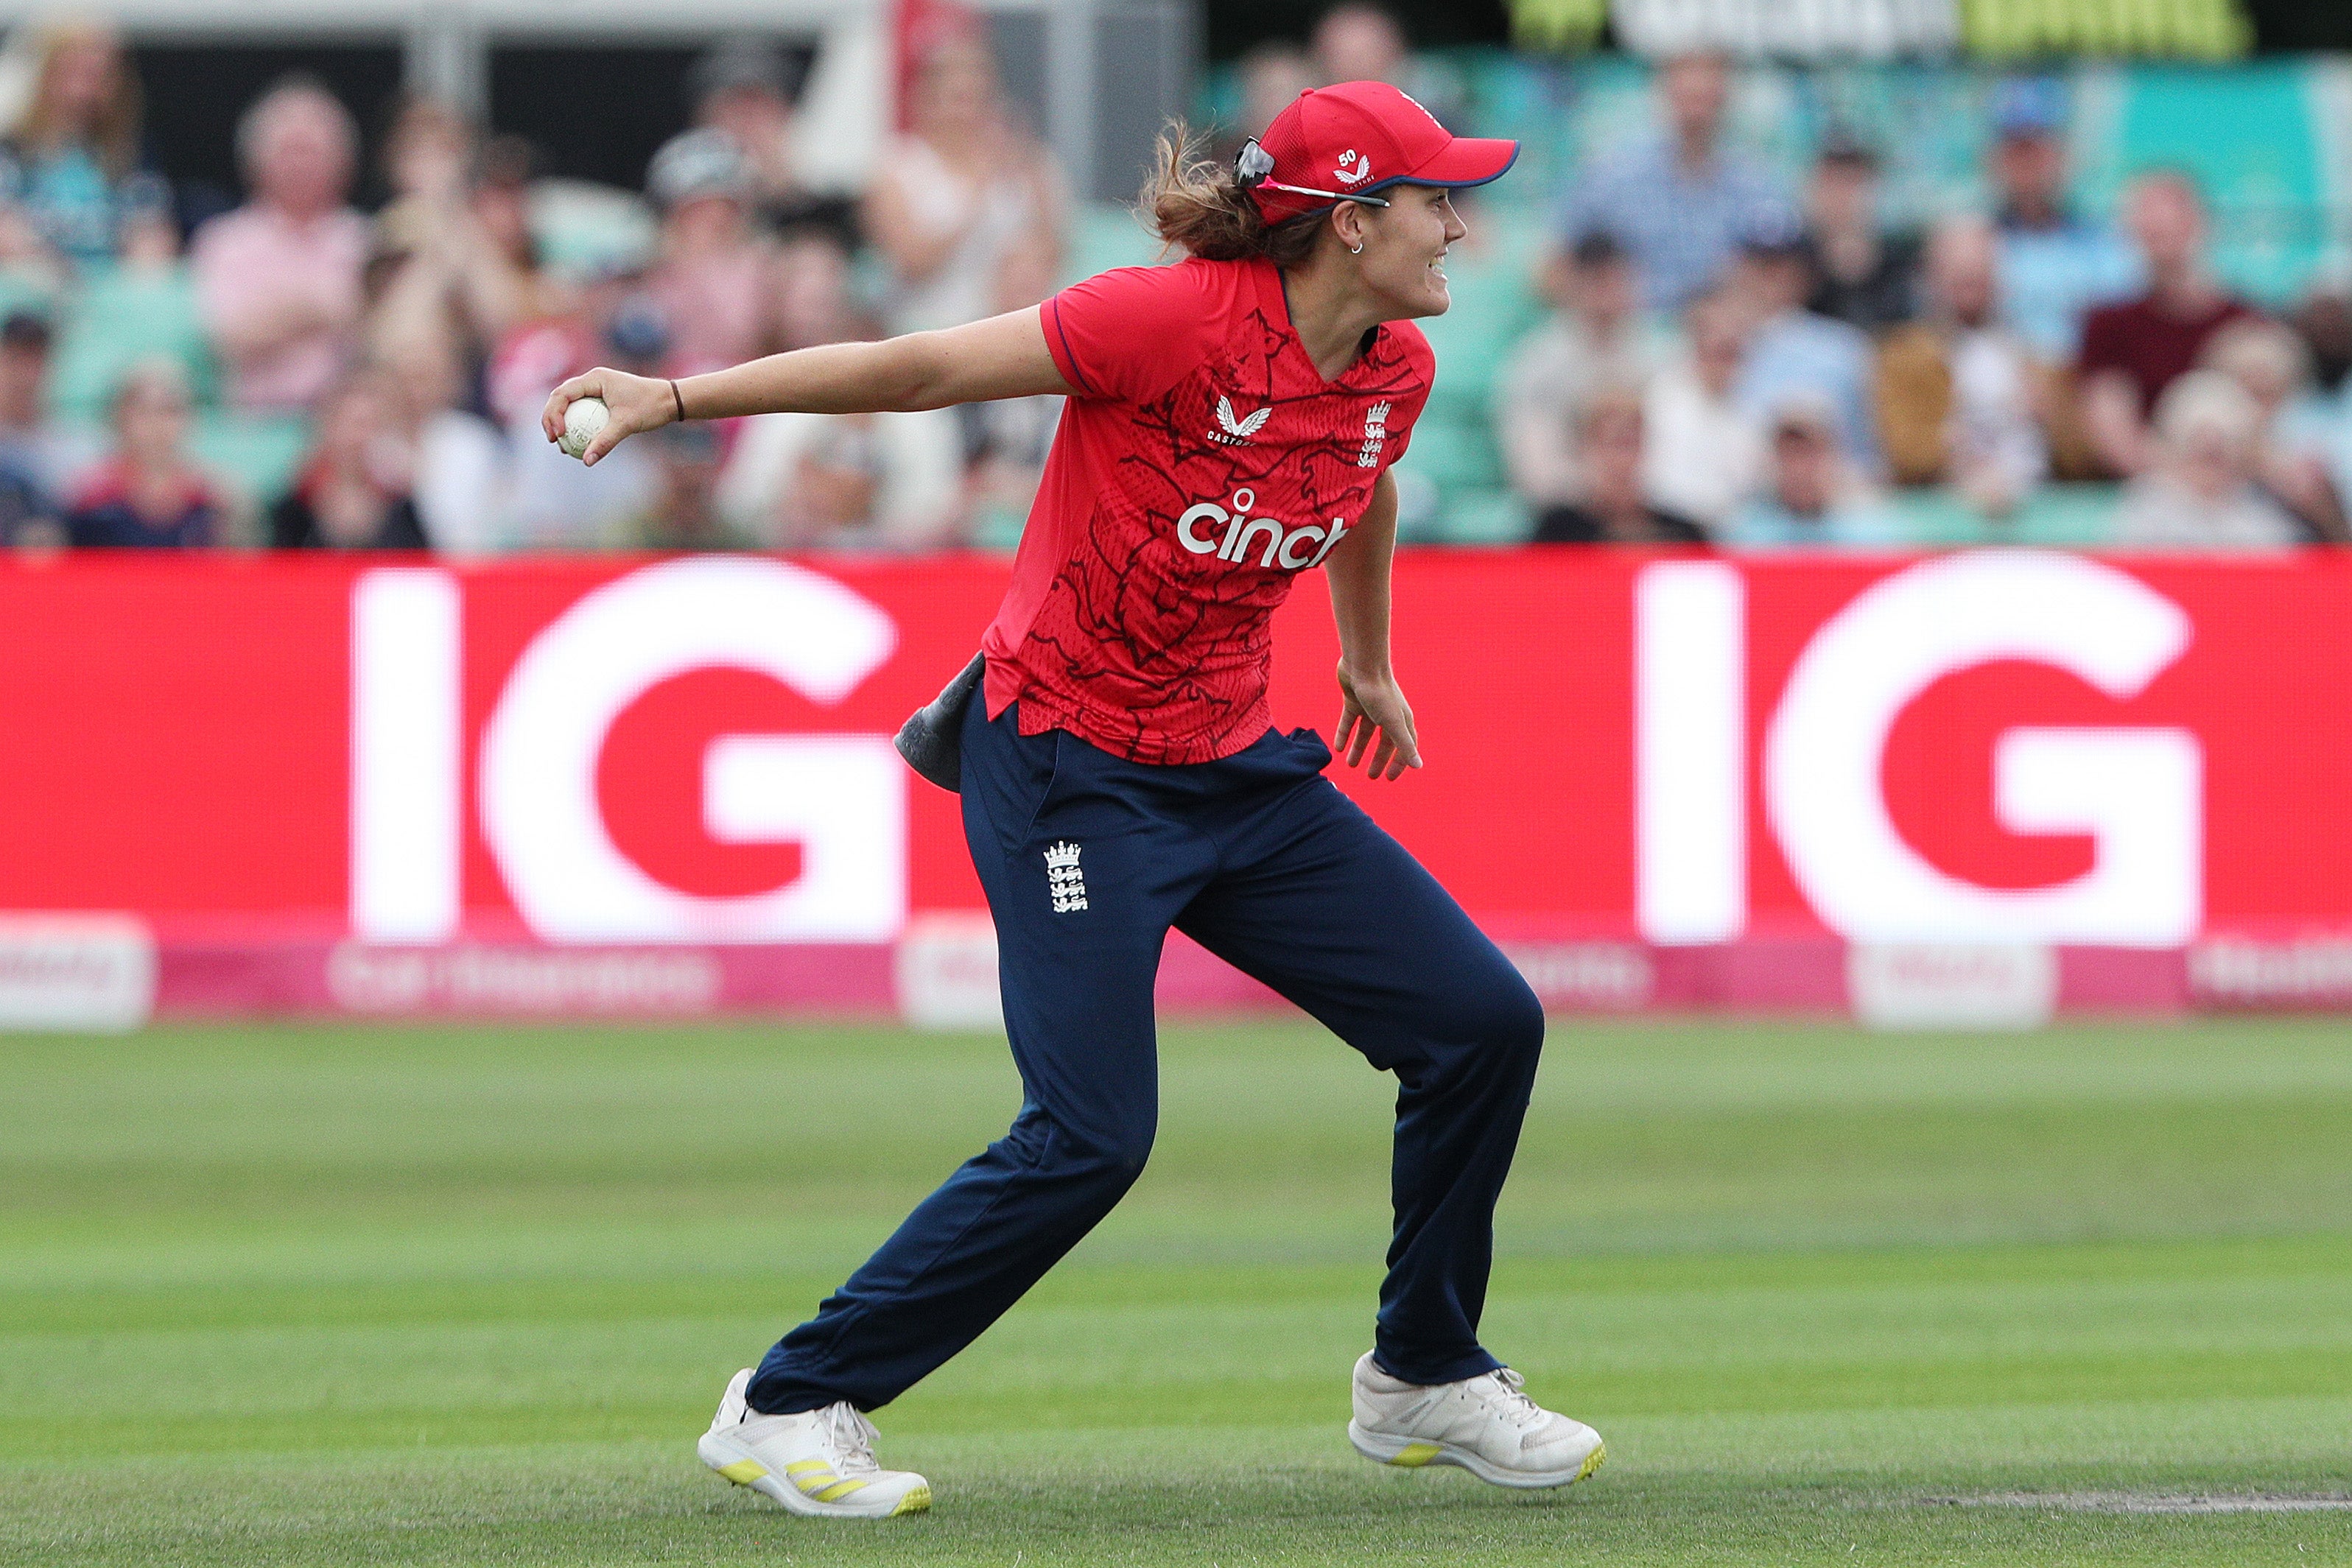 Sciver will continue to stand in for Heather Knight in the Vitality T20 series against India